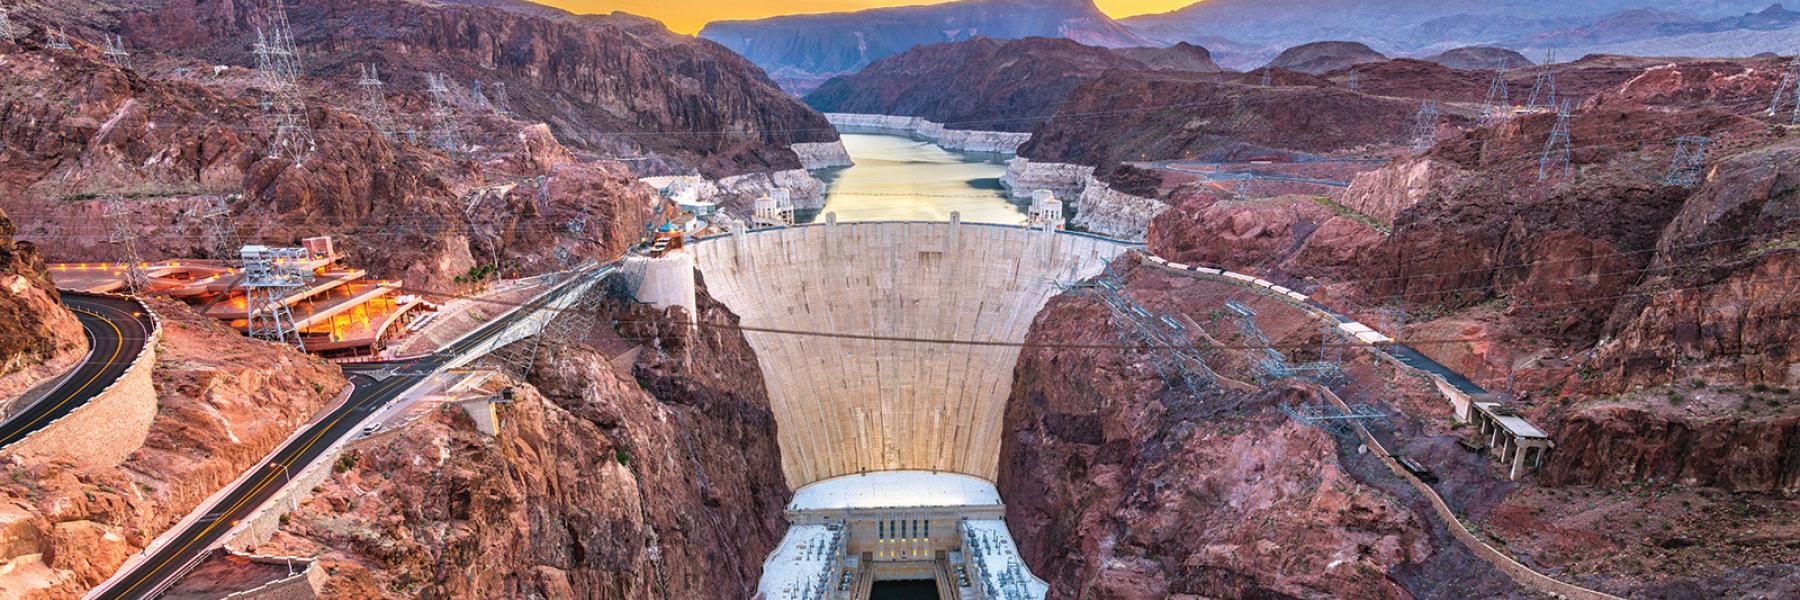 widescreen photograph of the Hoover Dam